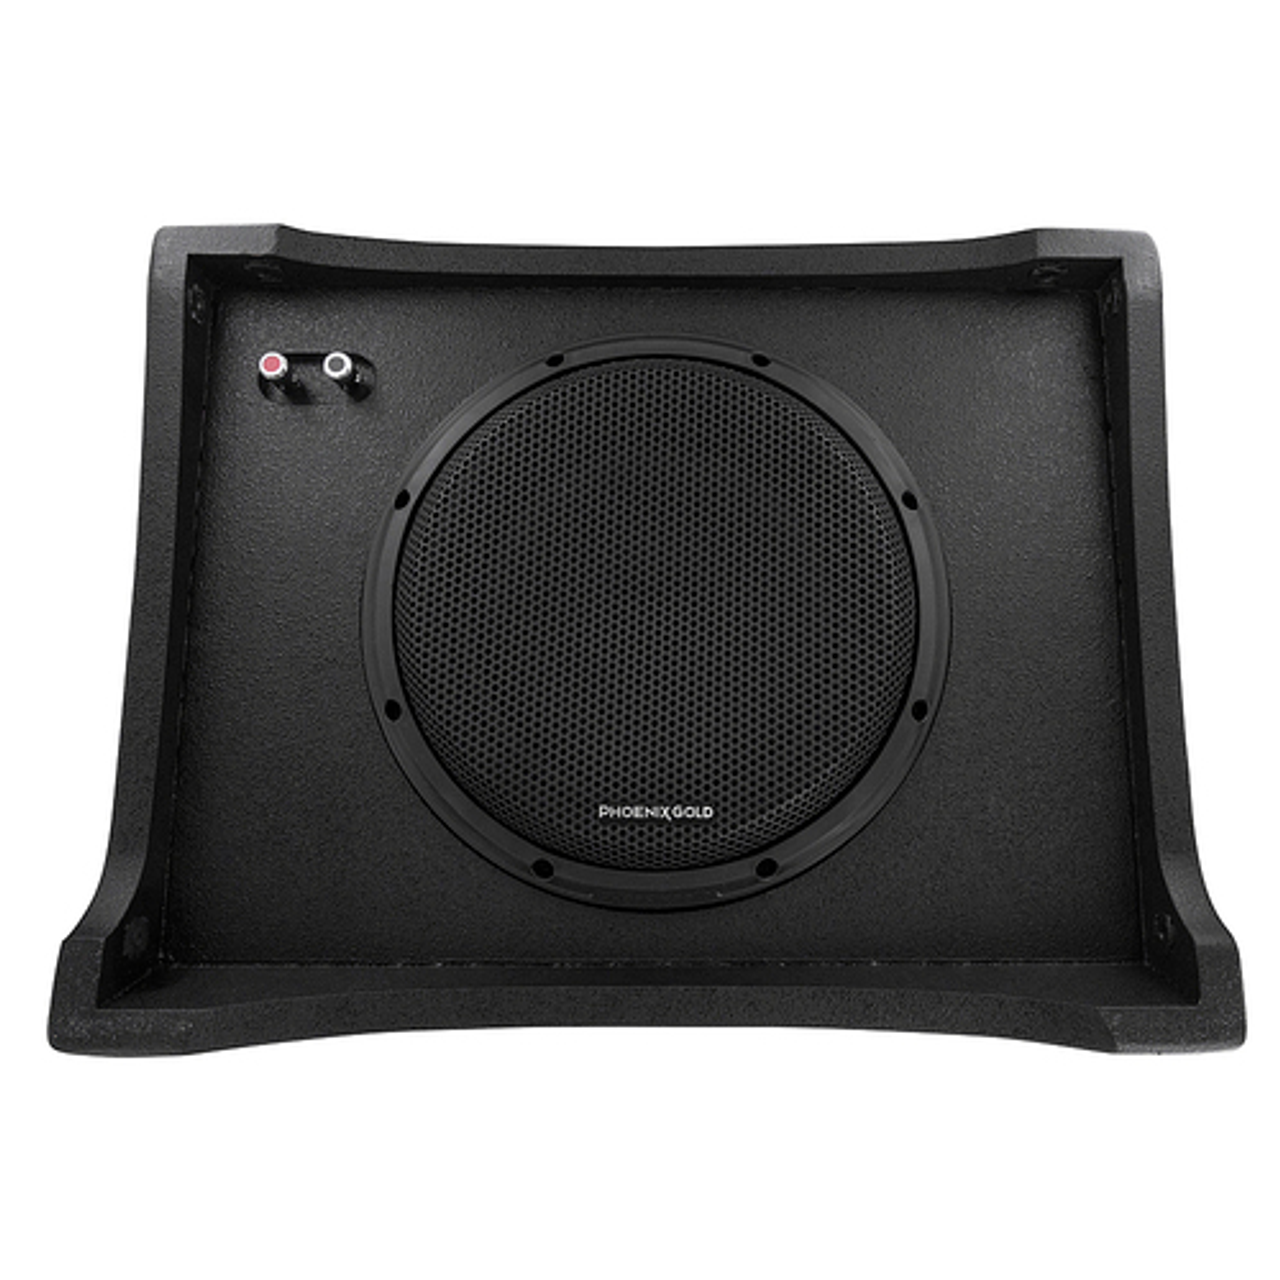 Phoenix Gold - 10” 400W 2-Ohm Loaded Under-Seat Subwoofer Enclosure for Select Full-Size Trucks and Other Vehicles - Black